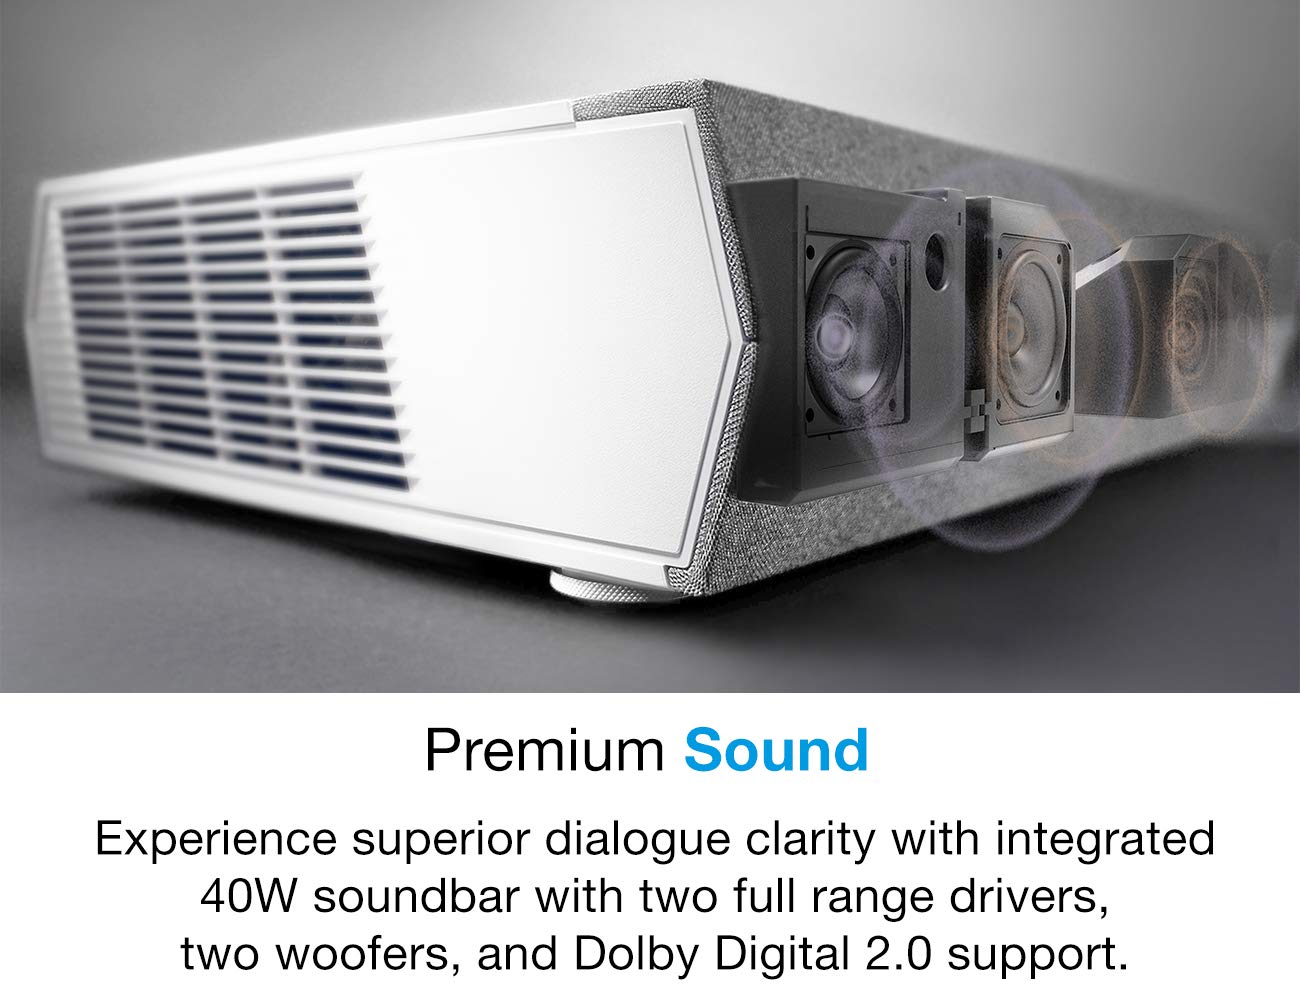 Optoma CinemaX P2 White Smart 4K UHD Laser Projector for Home Theater | 3000 Lumens Superior Image with Laser & 6-Segment Color Wheel | Ultra-Short Throw | Built-In Soundbar | Works w/ Alexa & Google